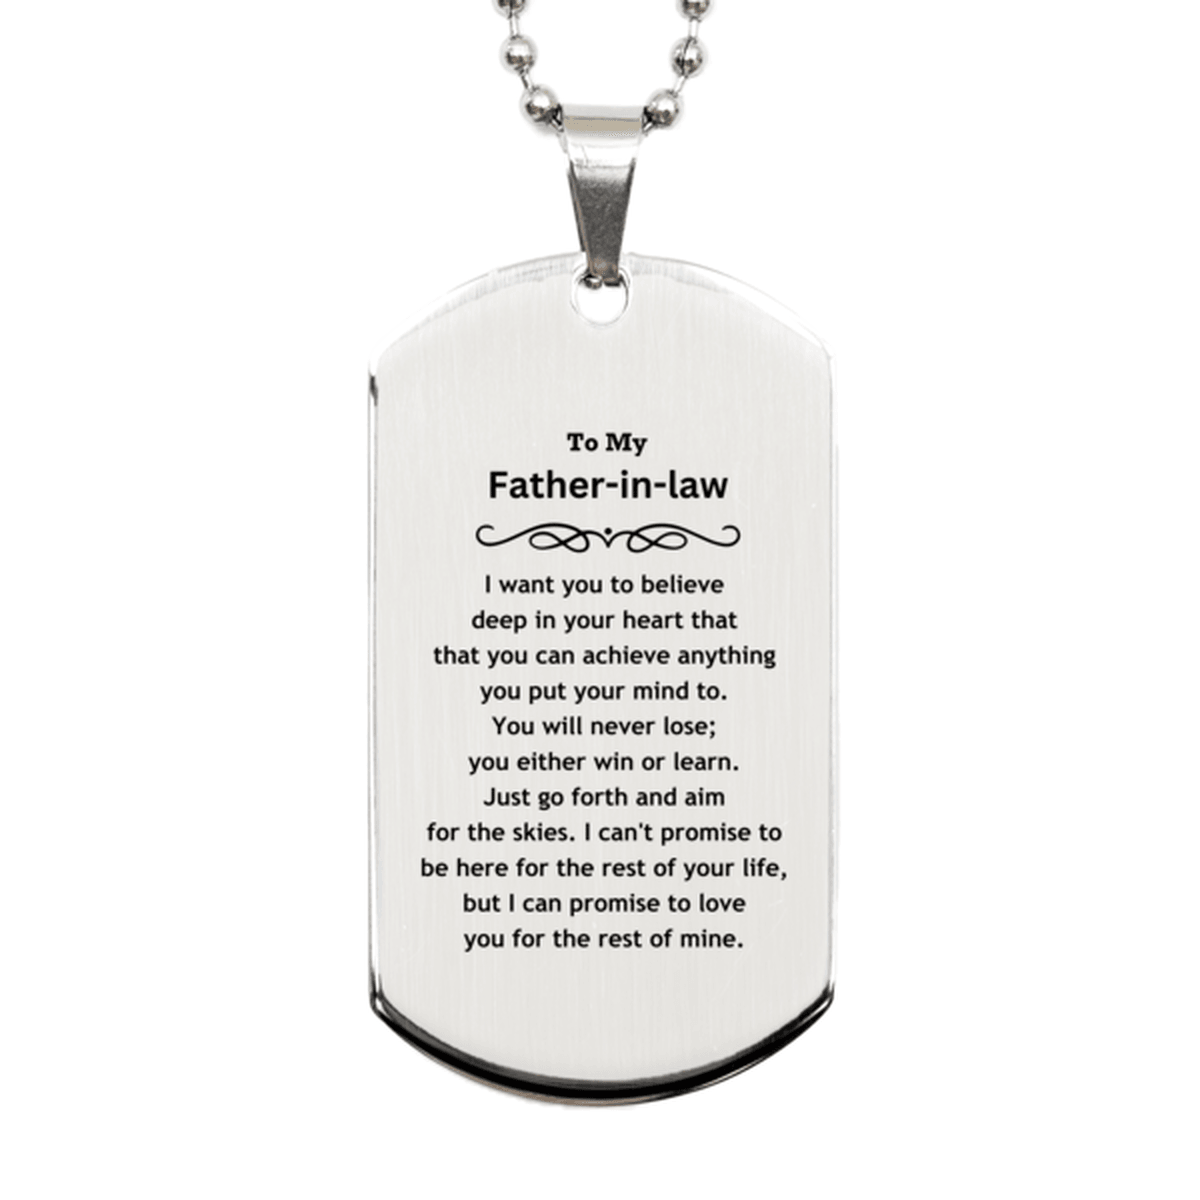 Motivational Father-in-law Silver Dog Tag Engraved Necklace, I can promise to love you for the rest of my life, Birthday Christmas Jewelry Gift - Mallard Moon Gift Shop